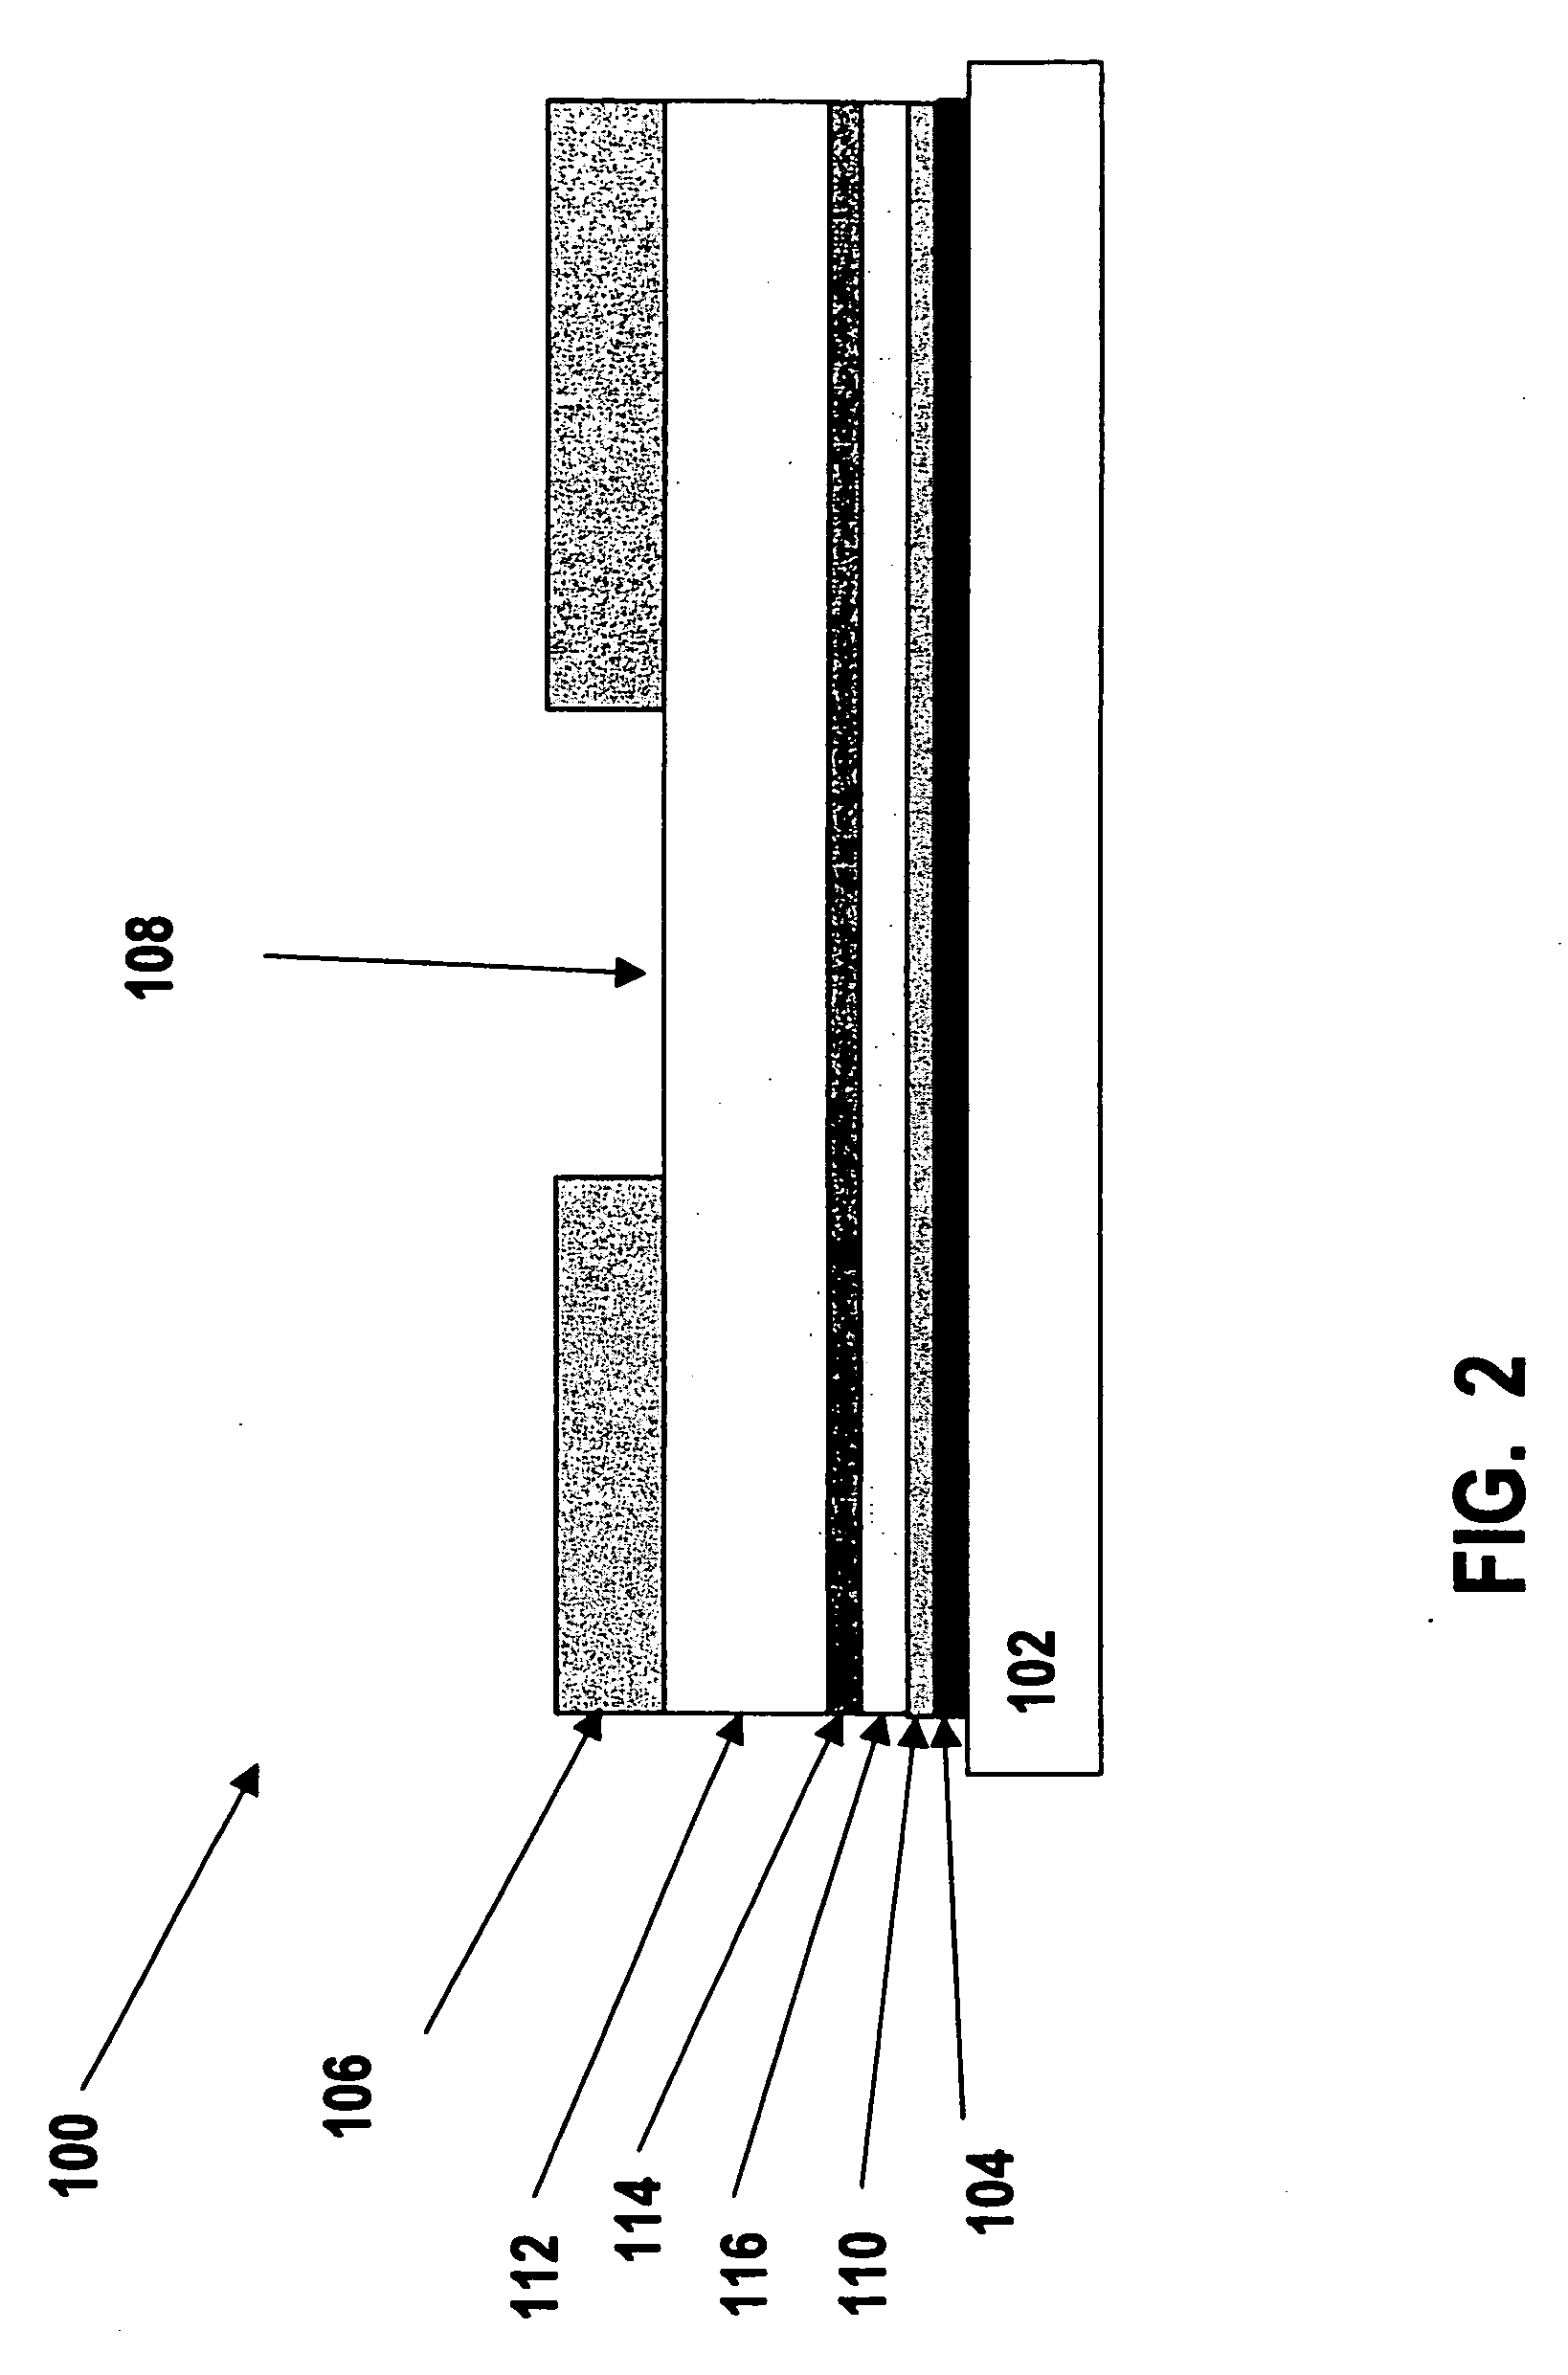 Analyte sensors and methods for making and using them